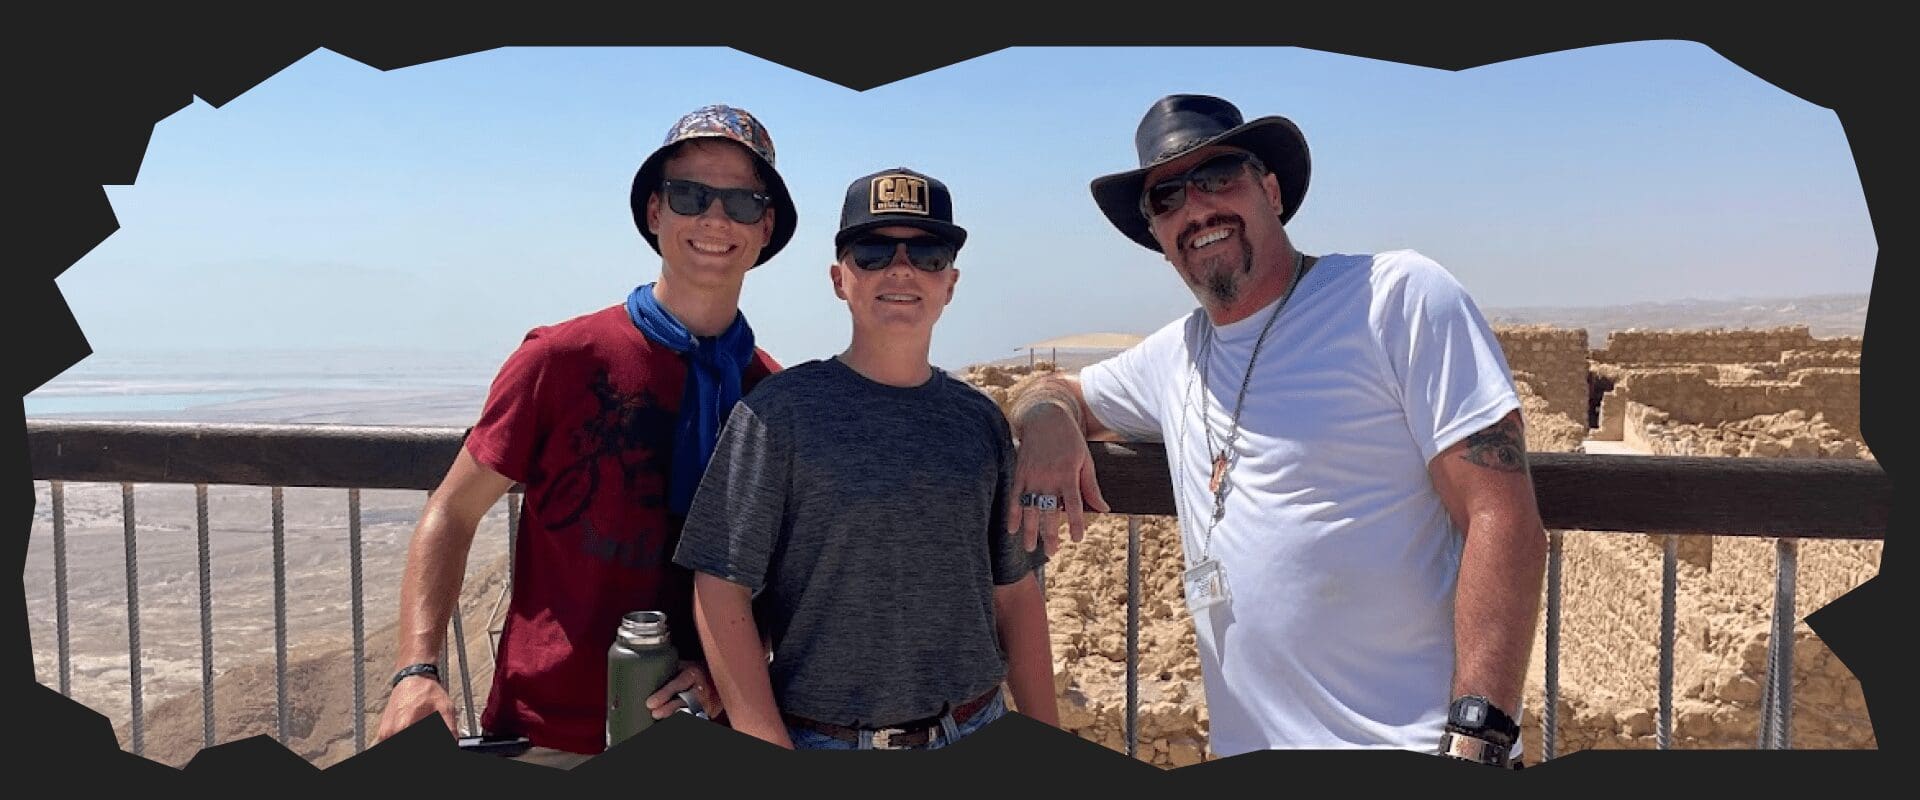 Shay Figenbaum with students from a USA Christian school, enjoying the historical site of Masada in Israel.